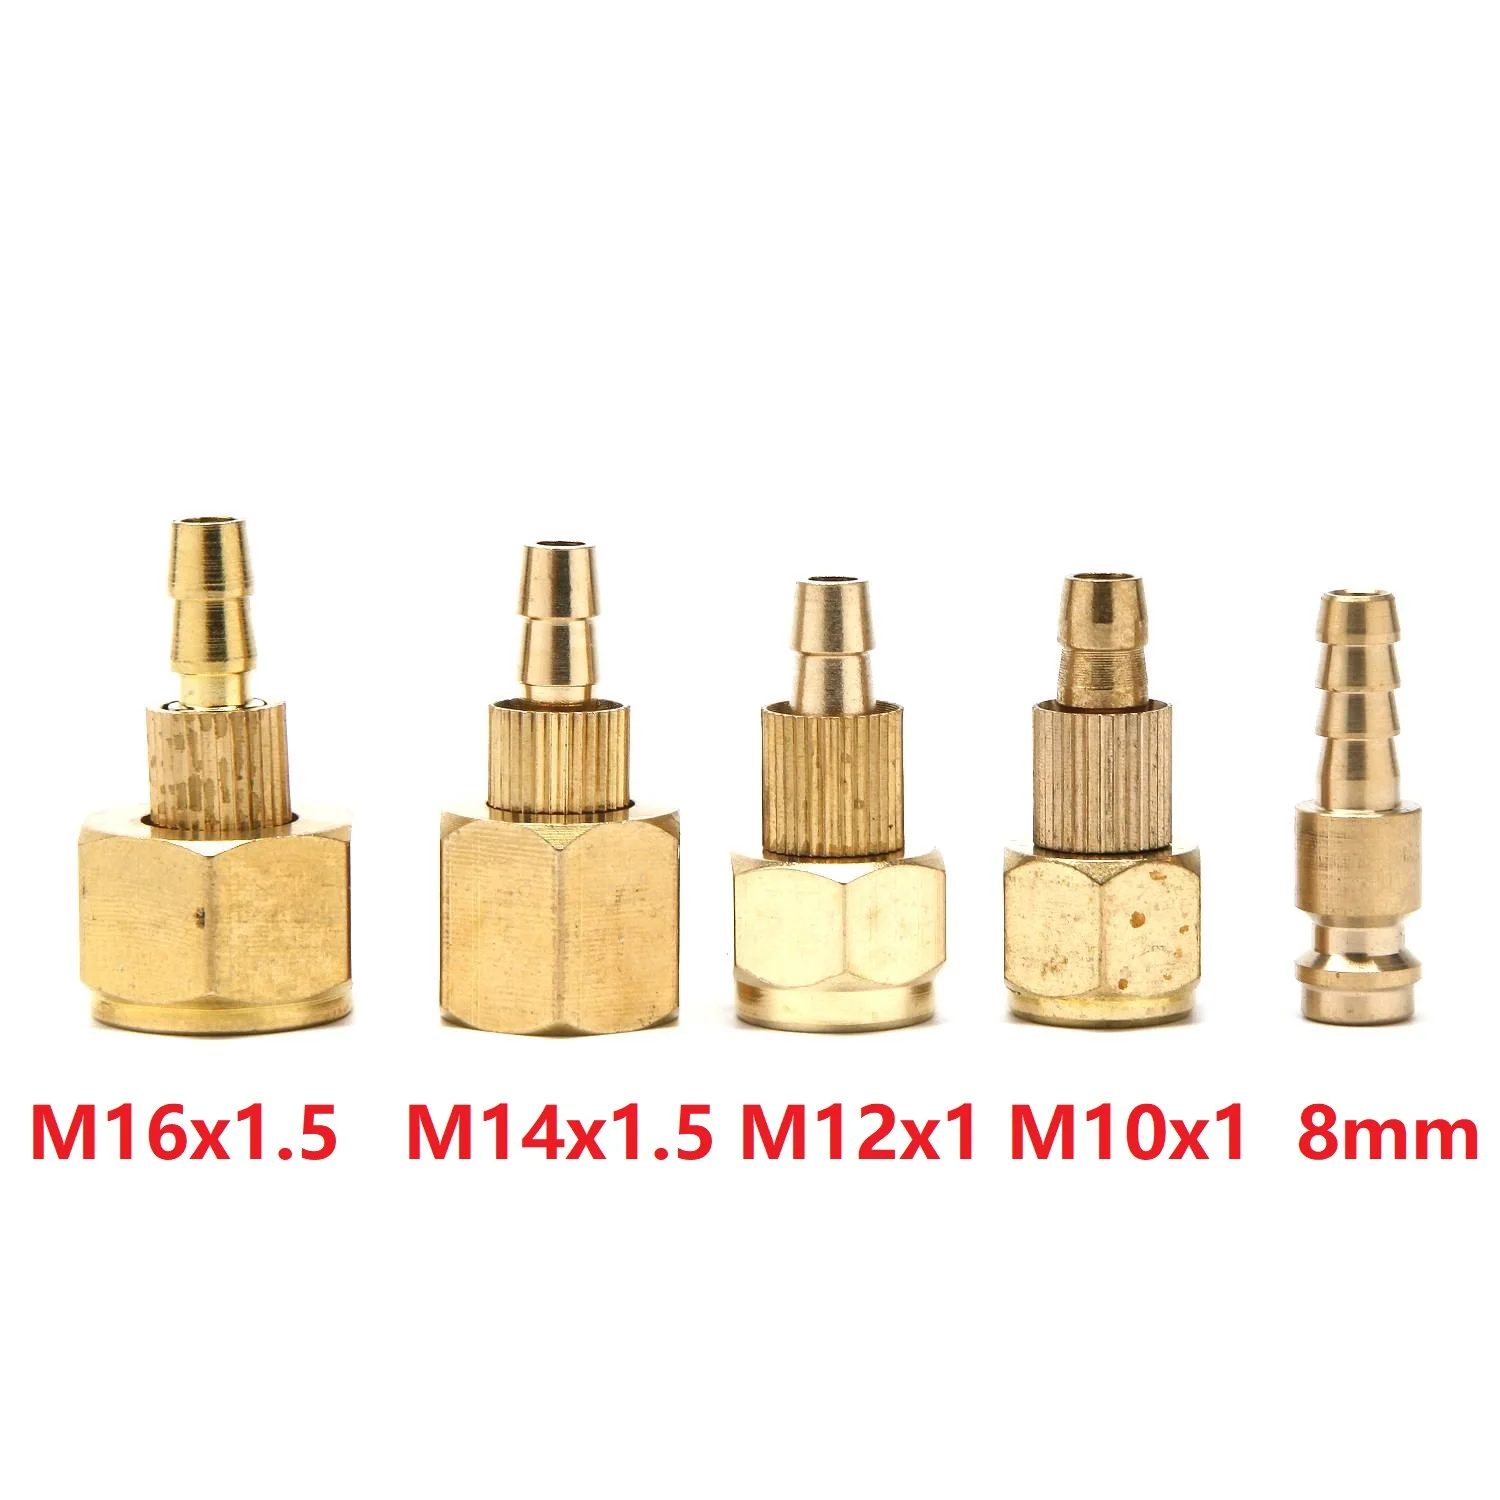 M16 M14 M12 M10 M16x1.5 M14x1.5 M12x1.0 M10x1.0 Gas Water Quick Fitting Hose Connector Brass Nut TIG Welding Torch Accessory